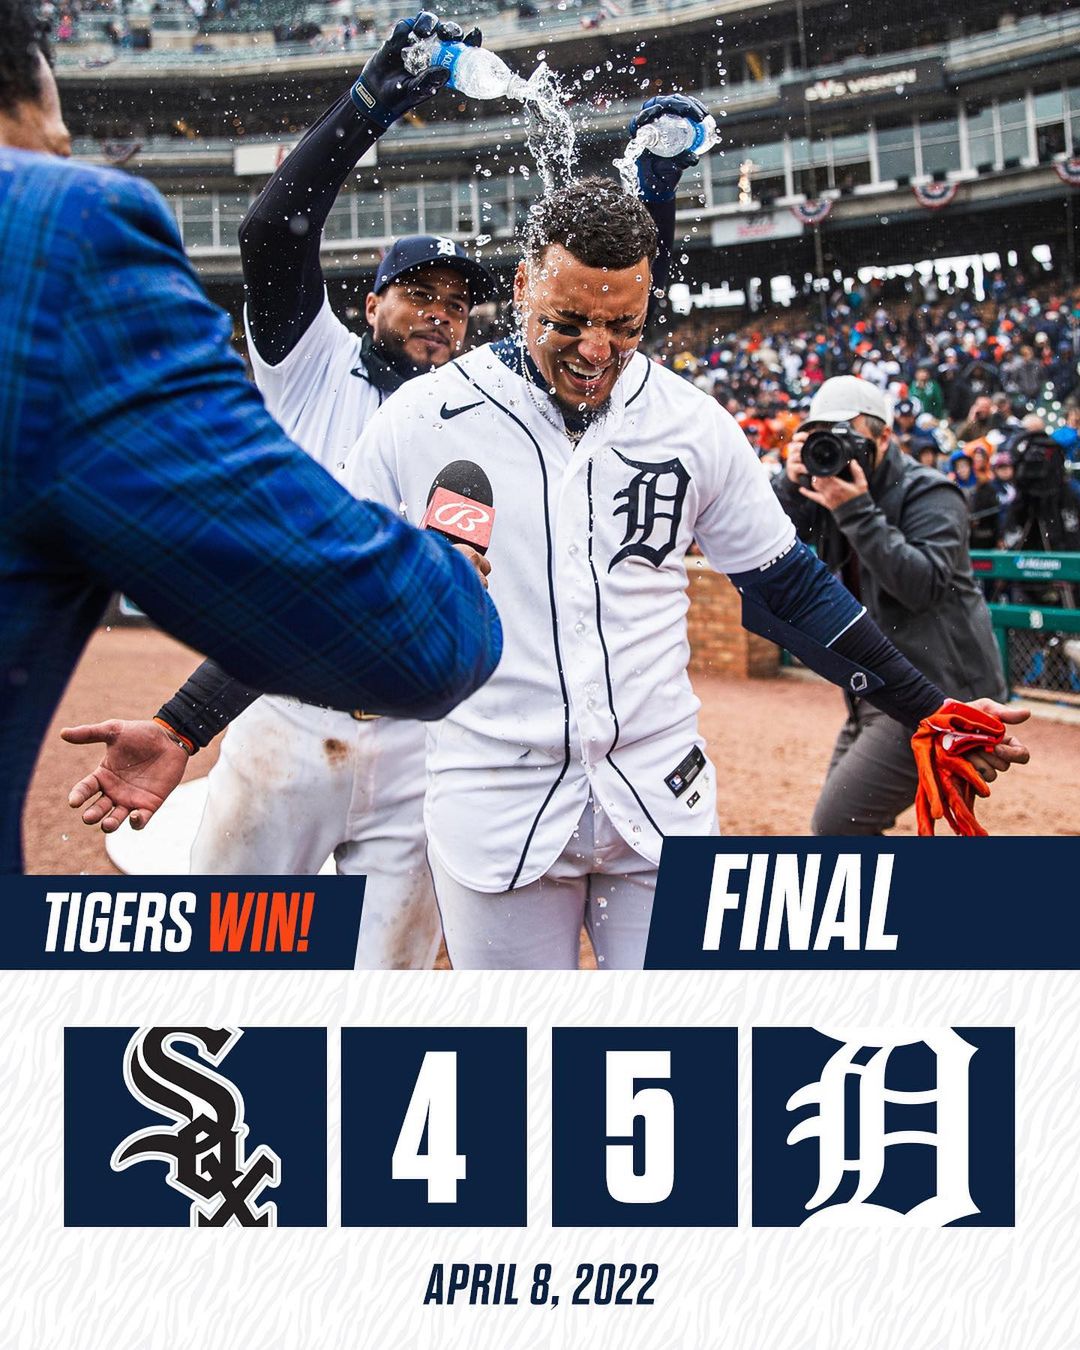 It’s not a miracle, it’s Mago. #TigersWin...